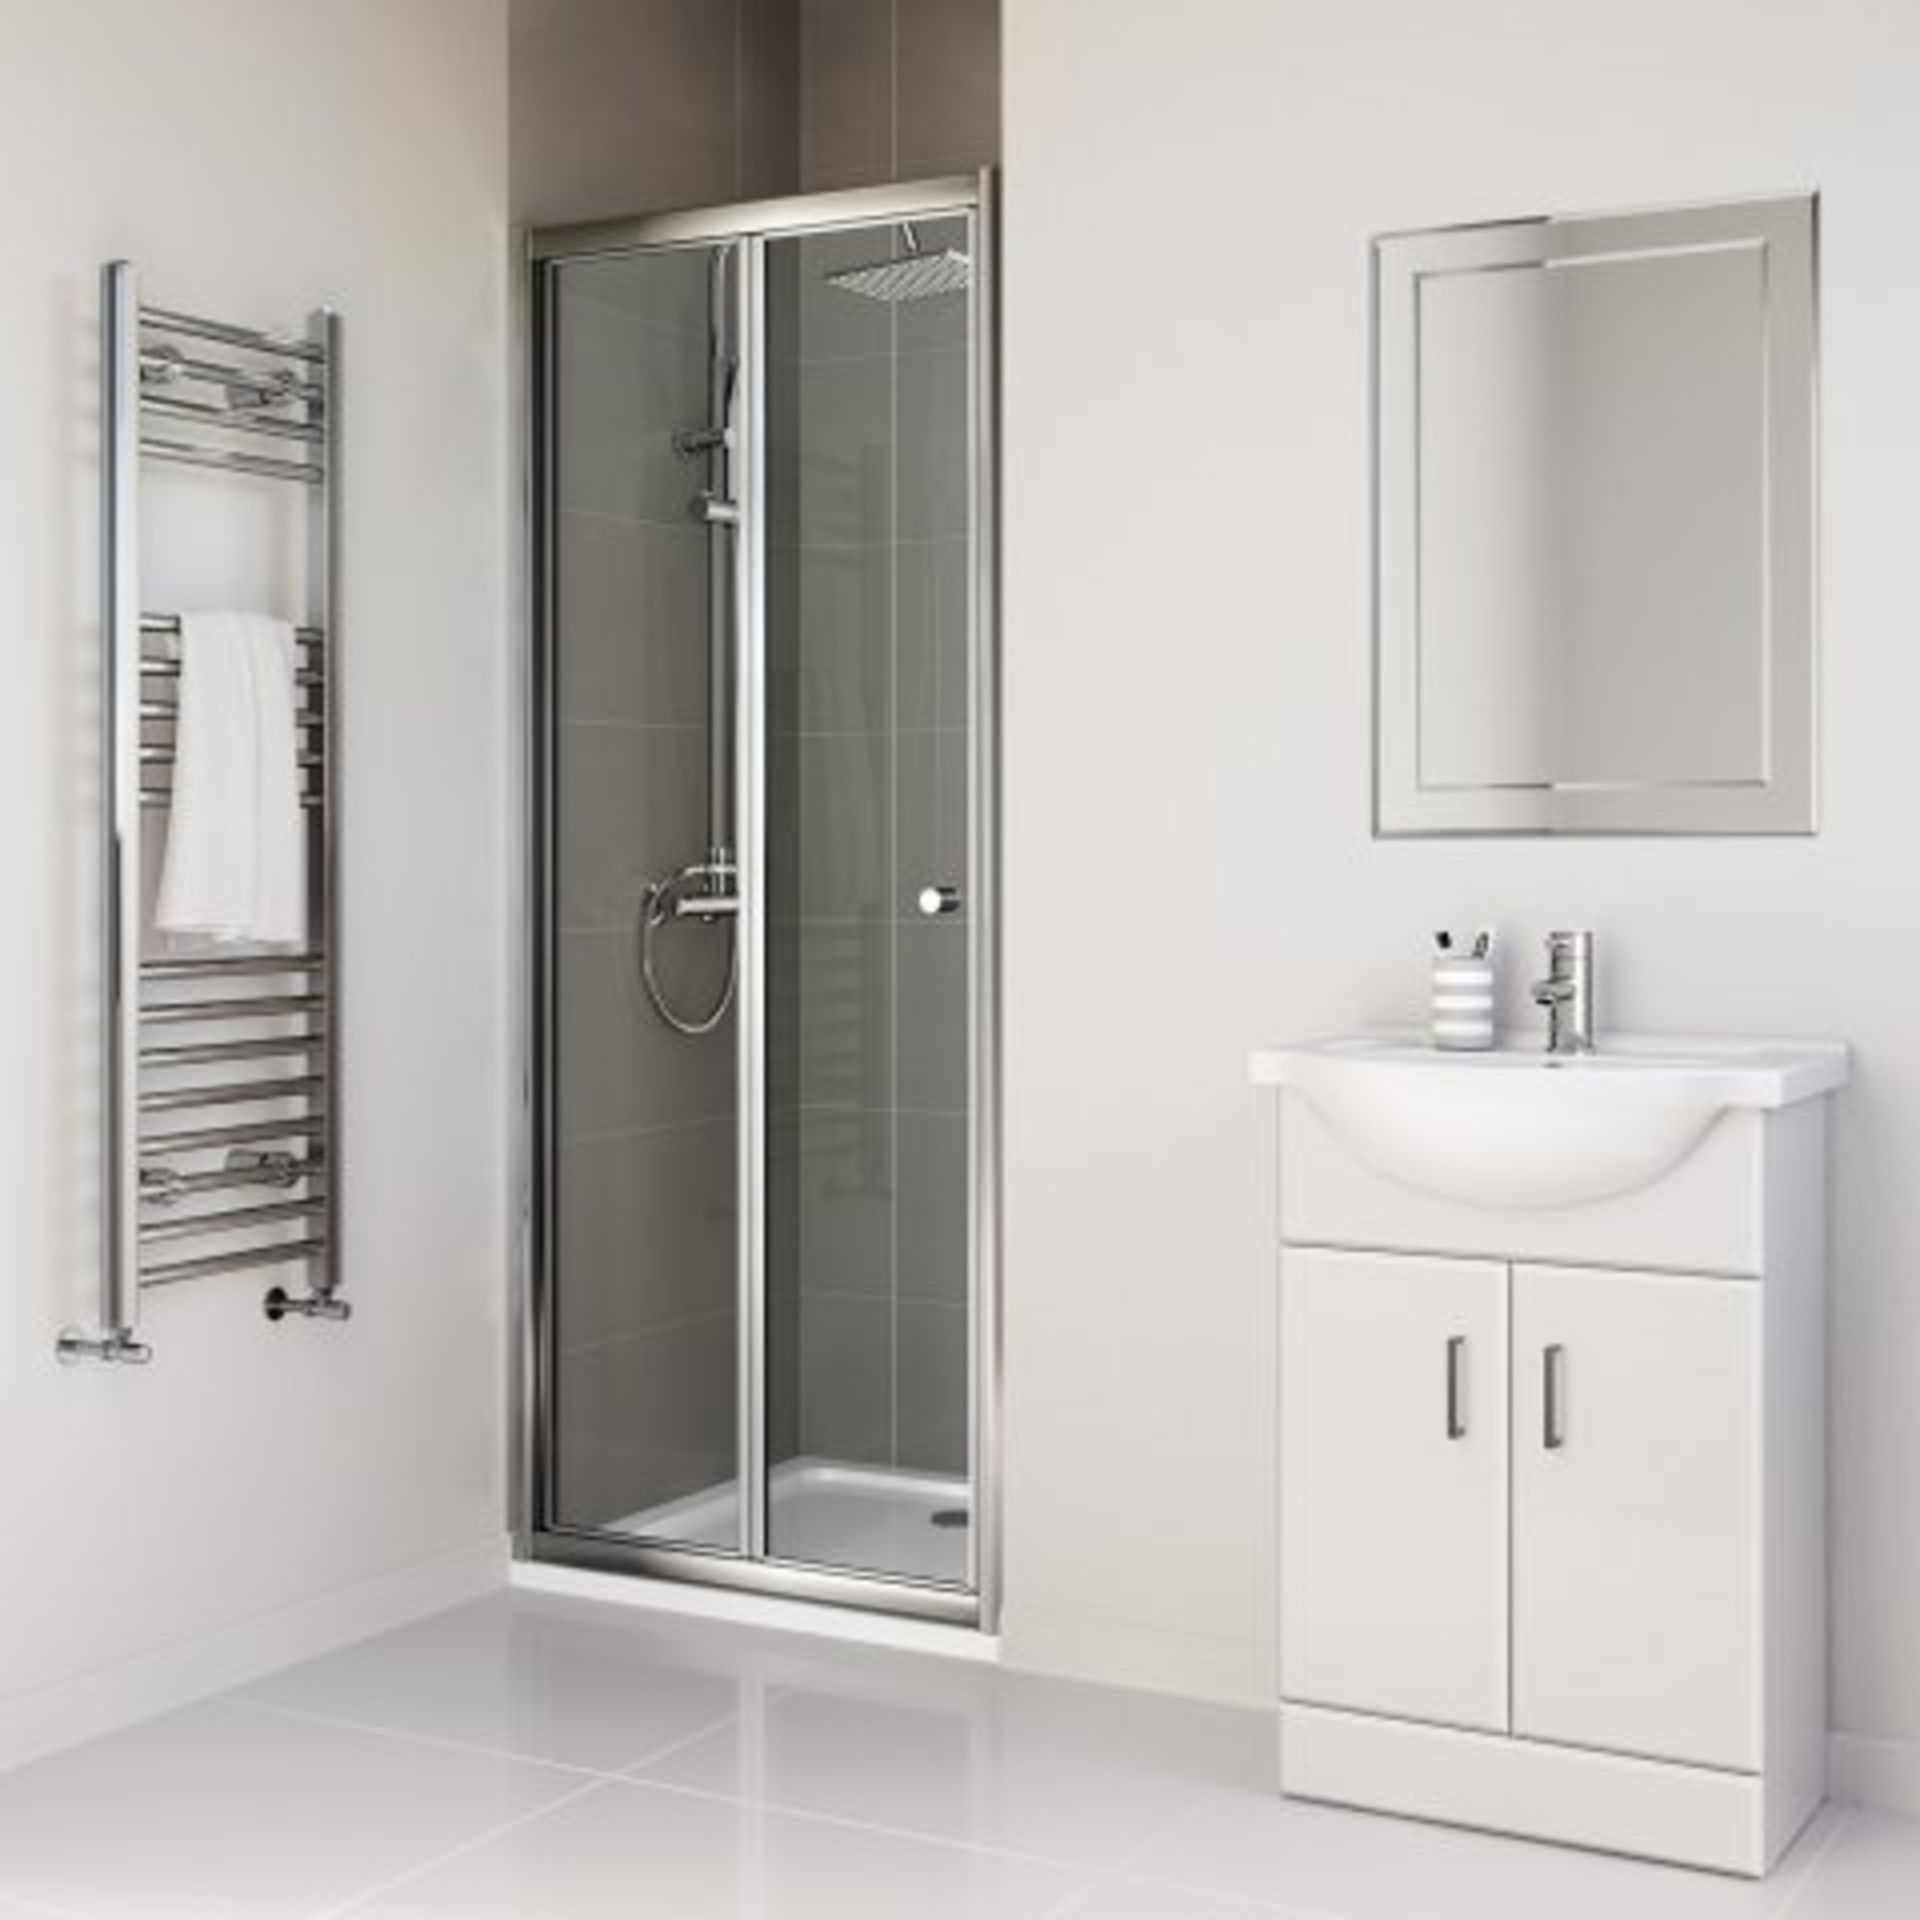 (I19) 760mm - Elements Bi Fold Shower Door RRP £299.99 Do you have an awkward nook or a tricky - Image 3 of 3